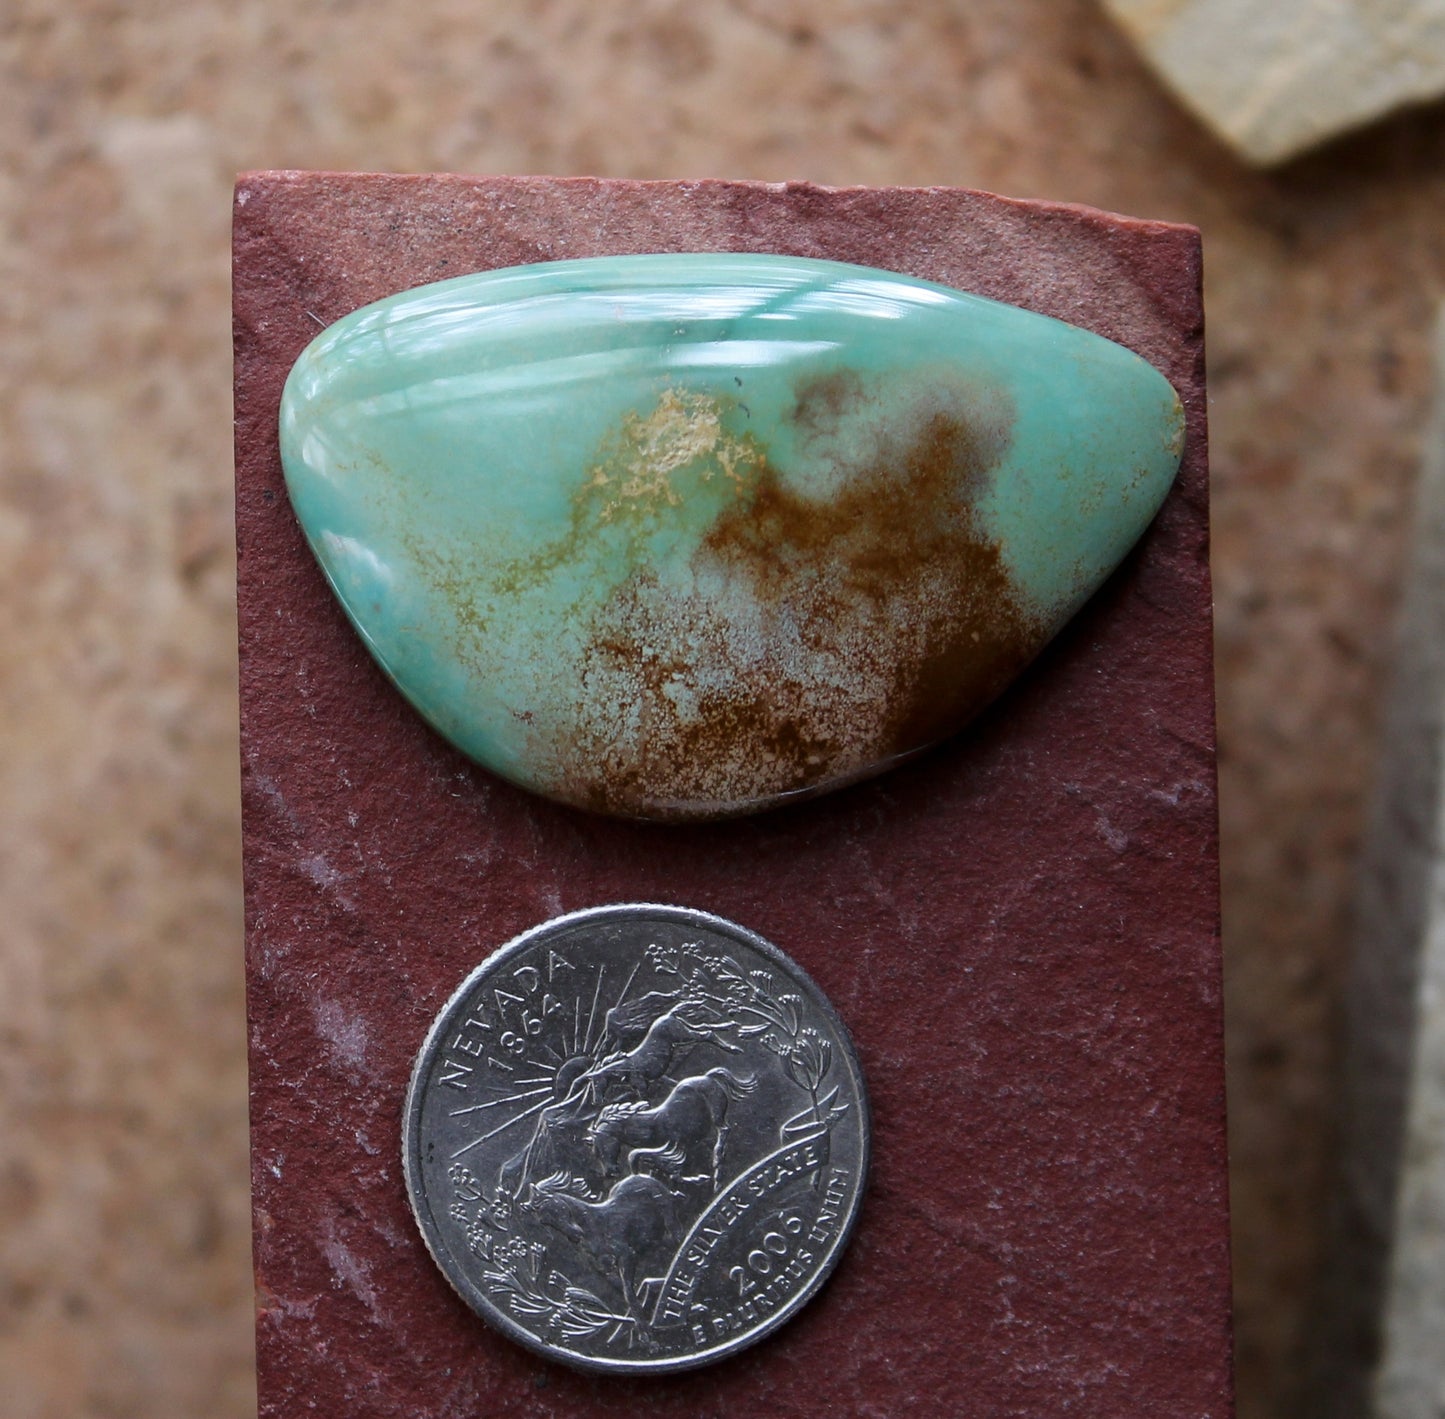 56 carat green turquoise cabochon specimen from Stone Mountain Mine